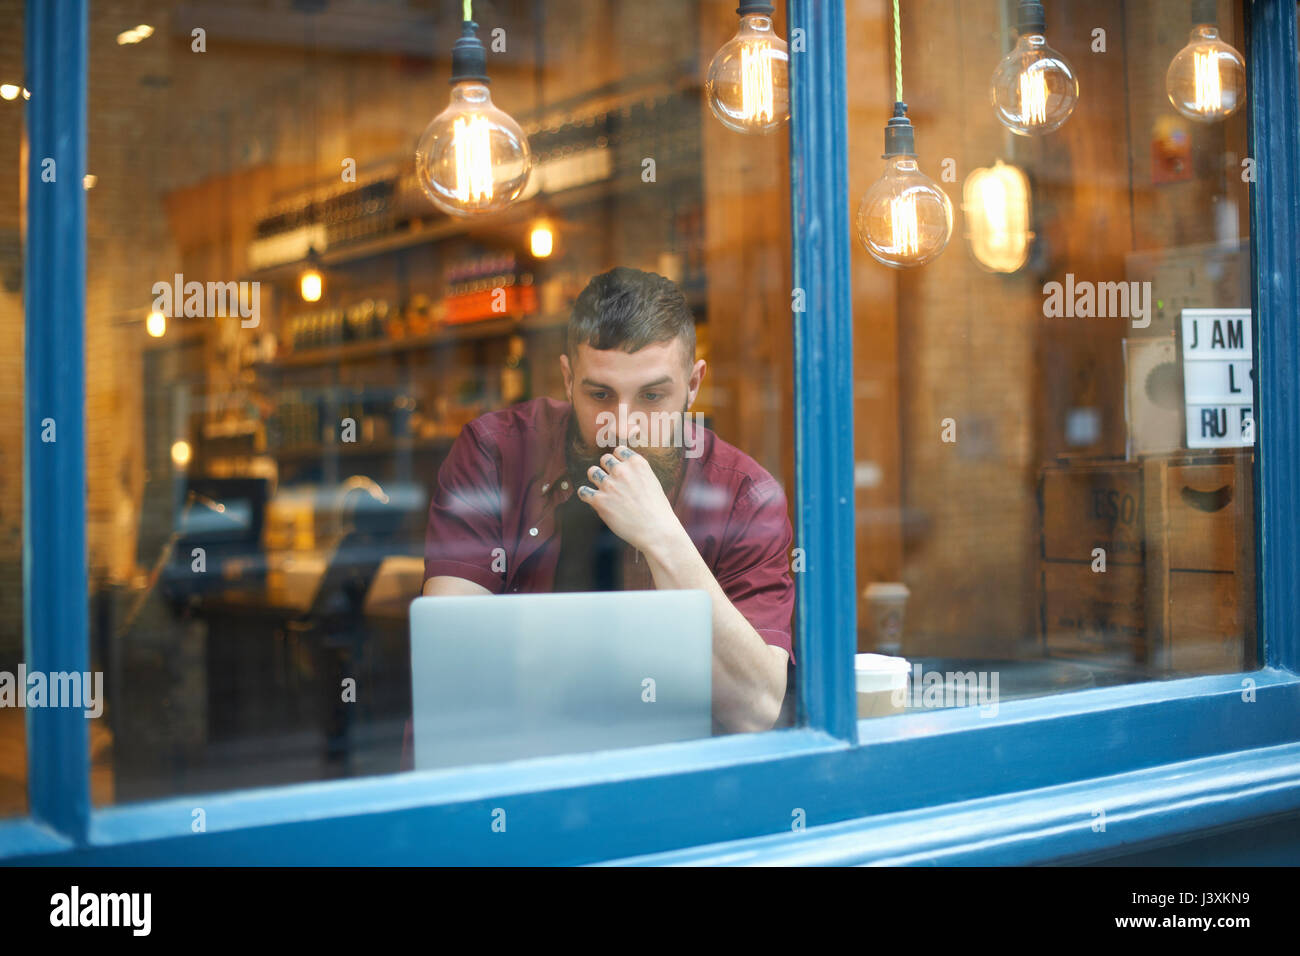 Window view of young man using laptop in cafe Stock Photo